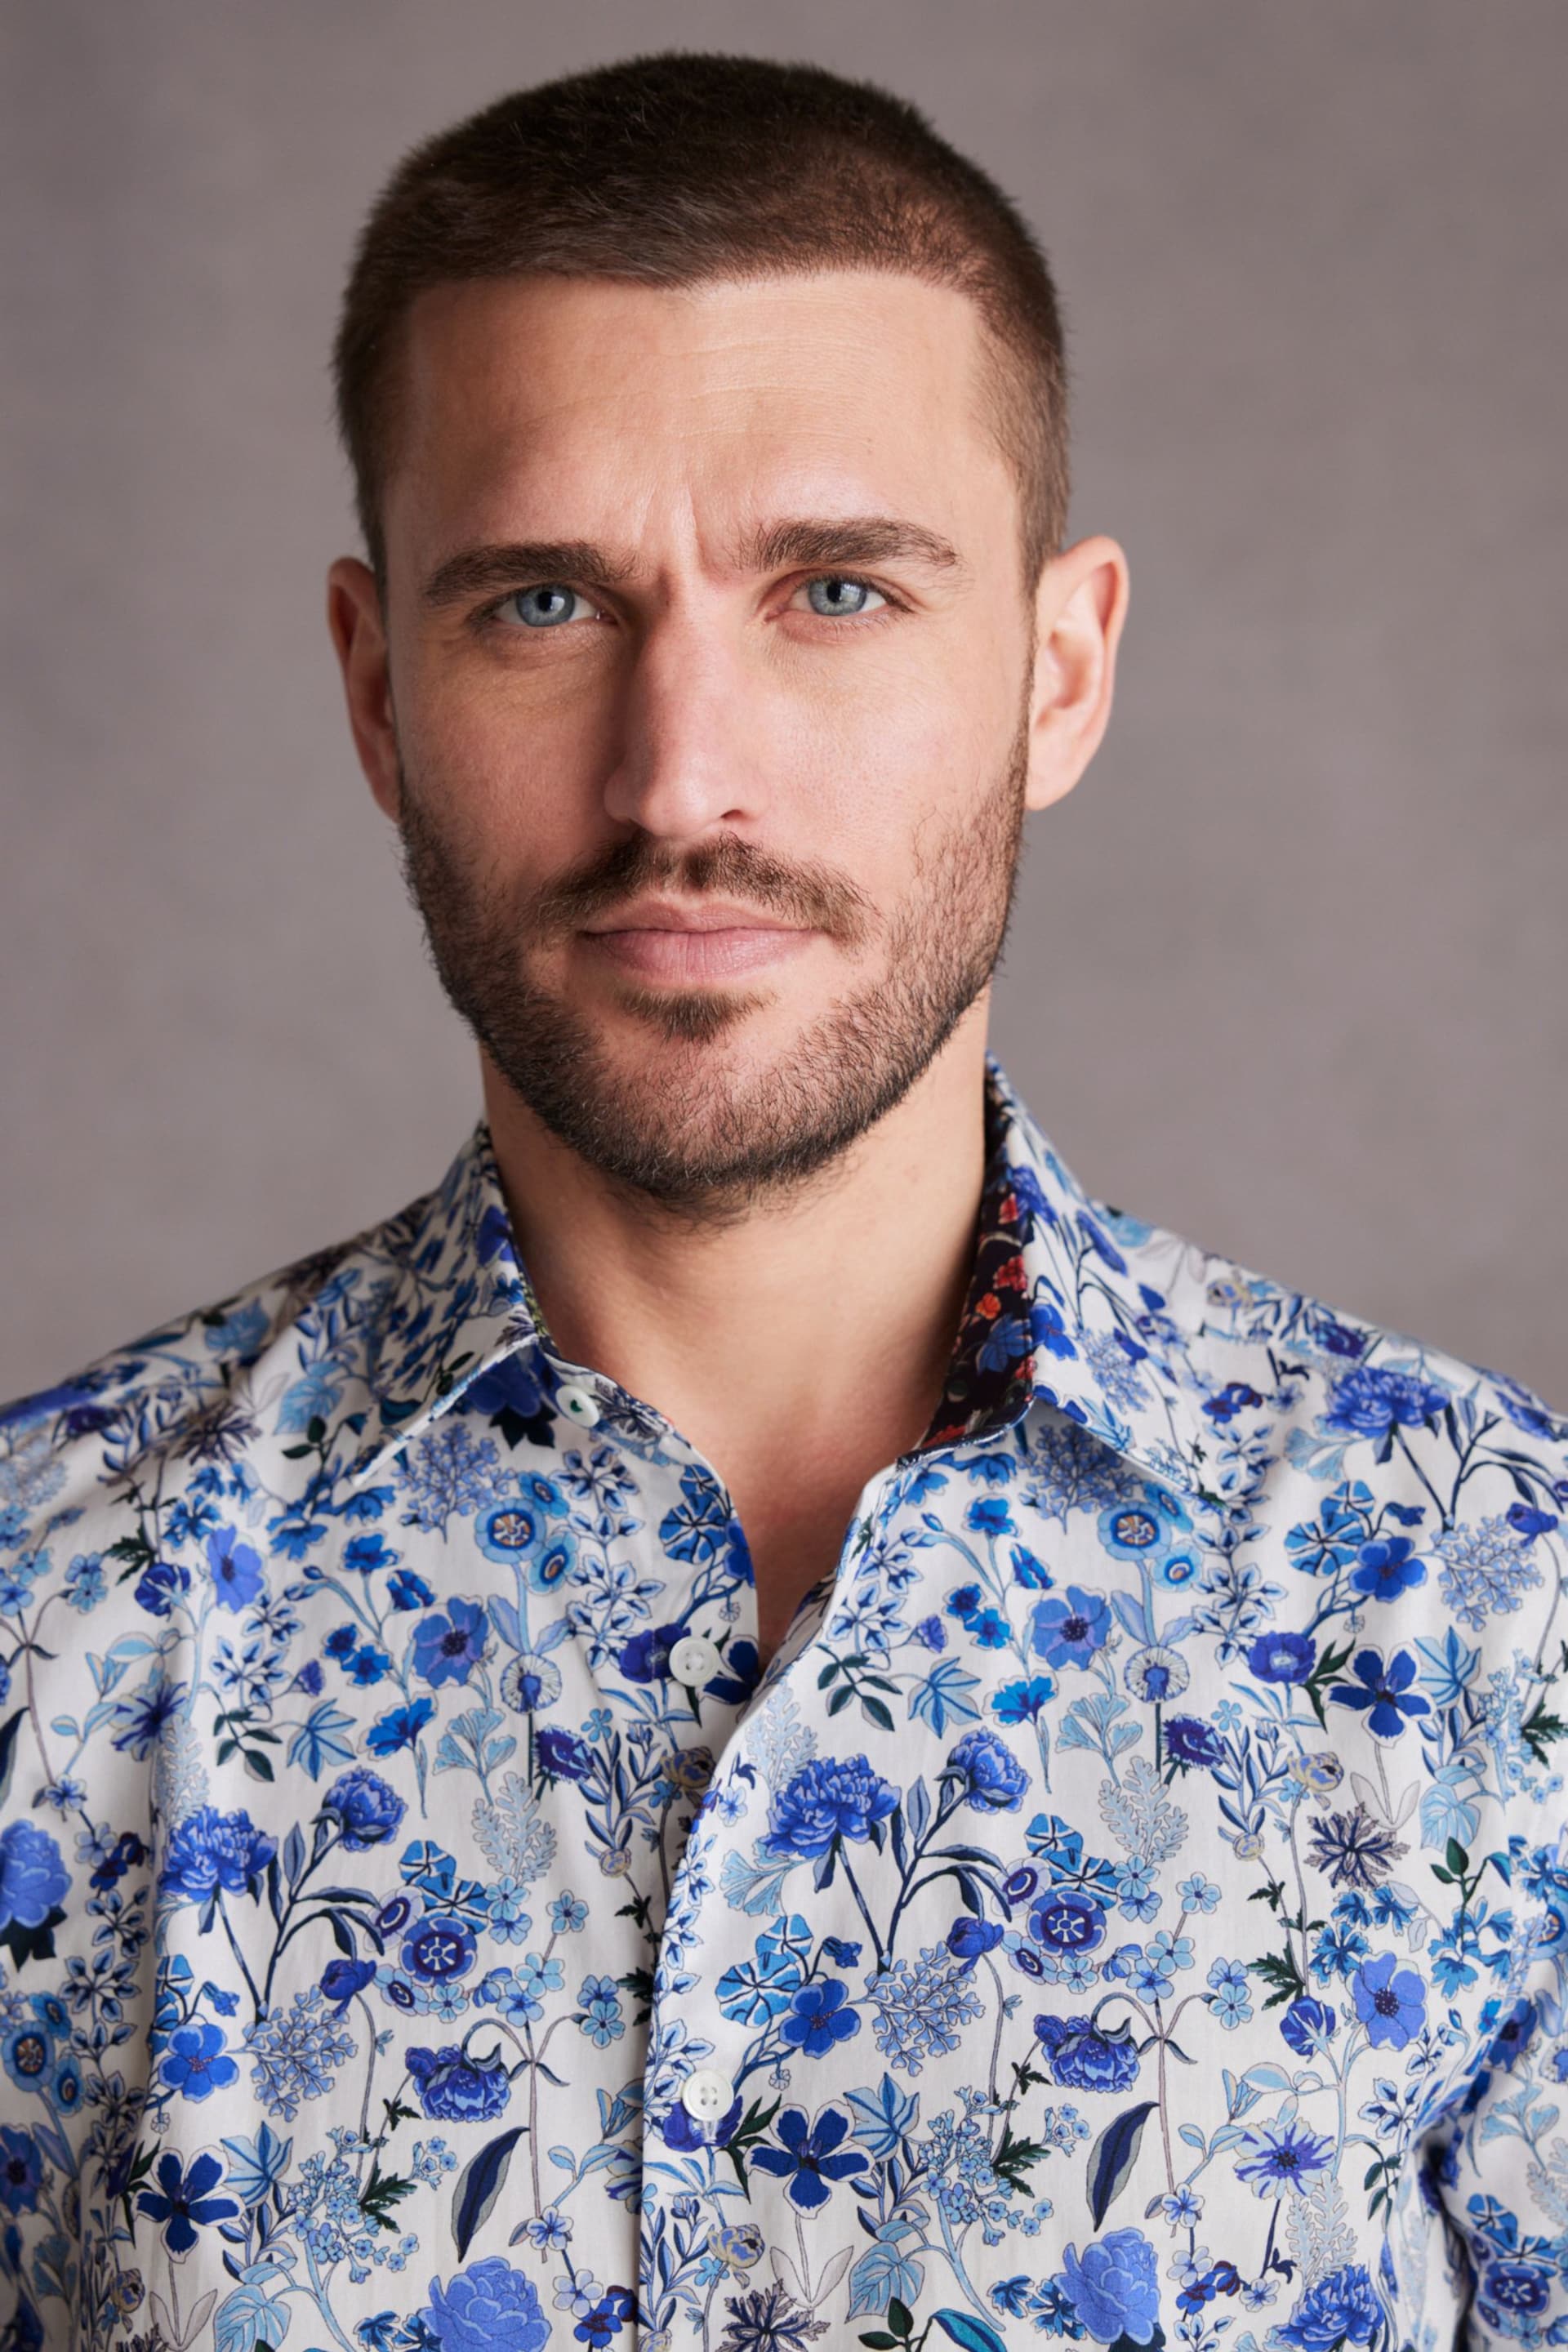 White/Blue Floral Signature Made With Italian Fabric Printed Short Sleeve Shirt - Image 4 of 7